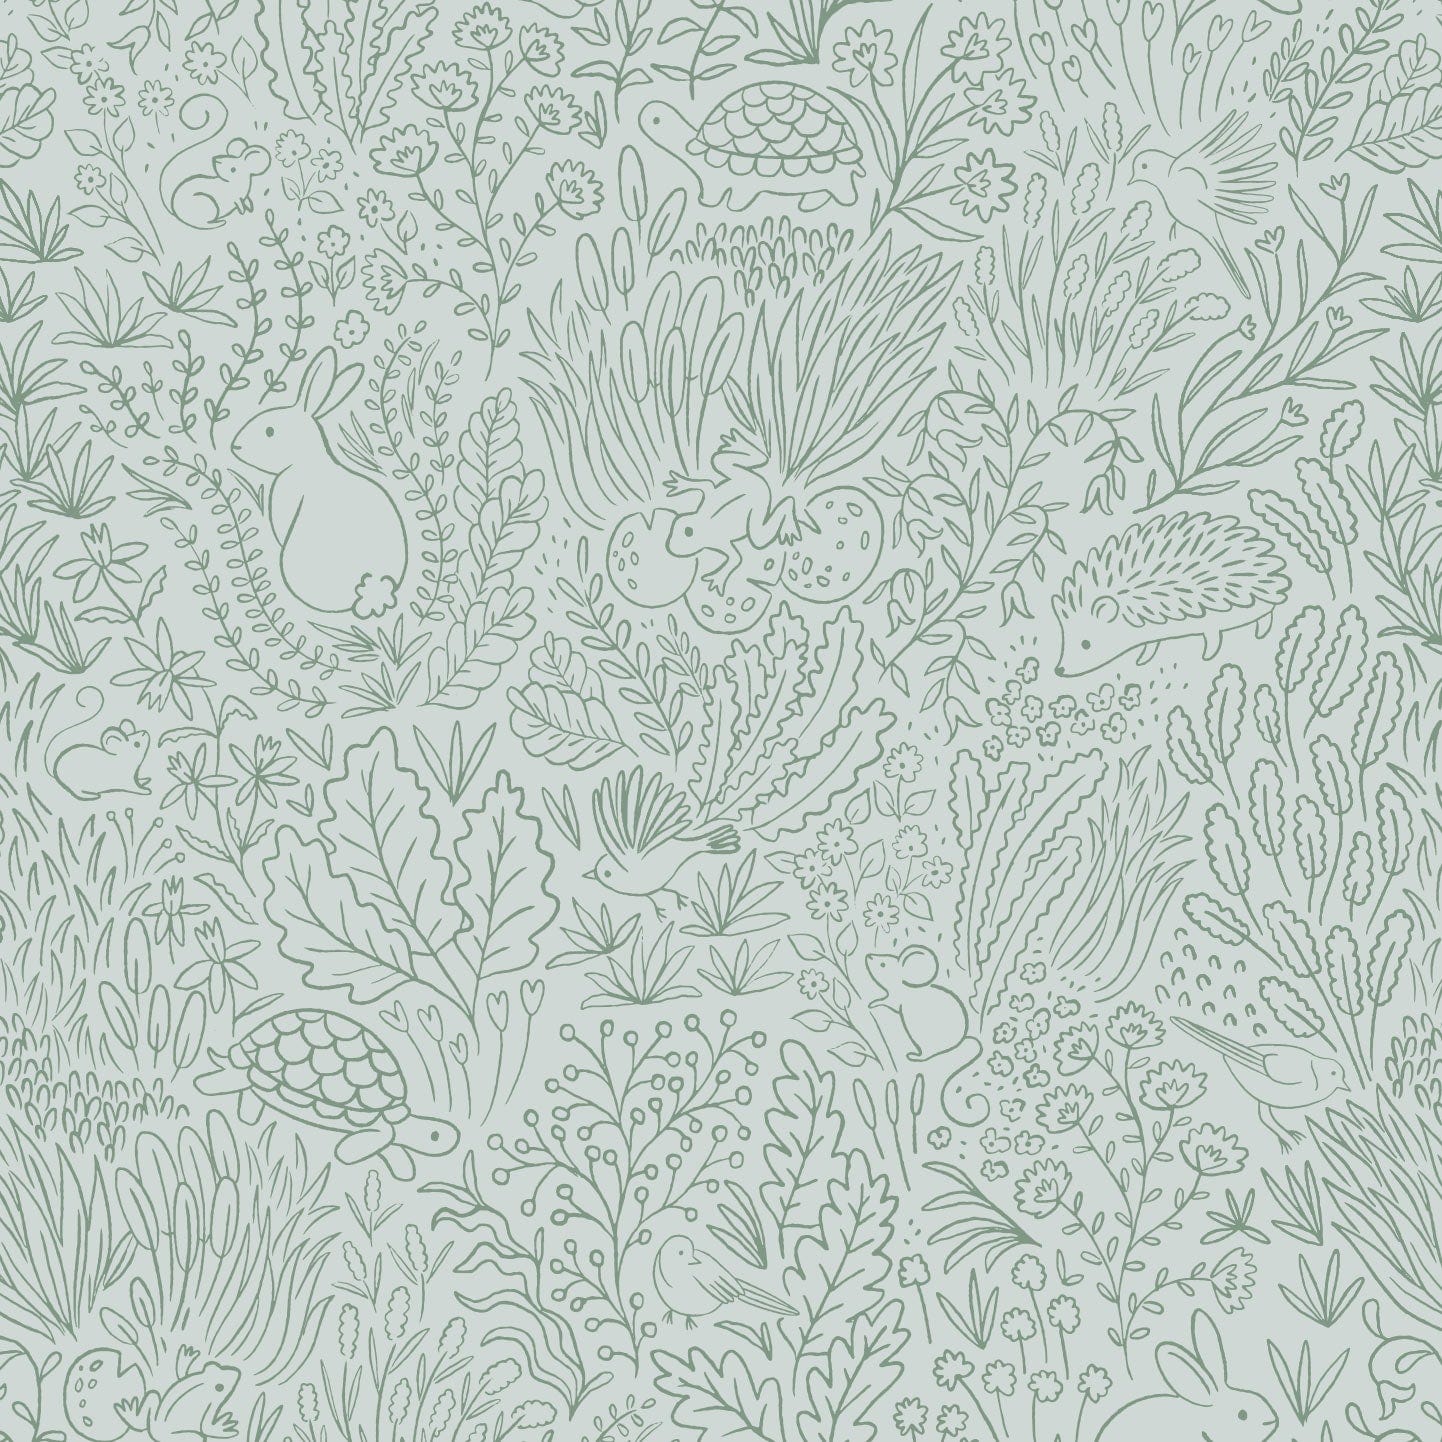 Wallpaper sample of sage green line work animals and florals such as rabbits, hedgehogs, frogs, tortoise, mice and birds. 